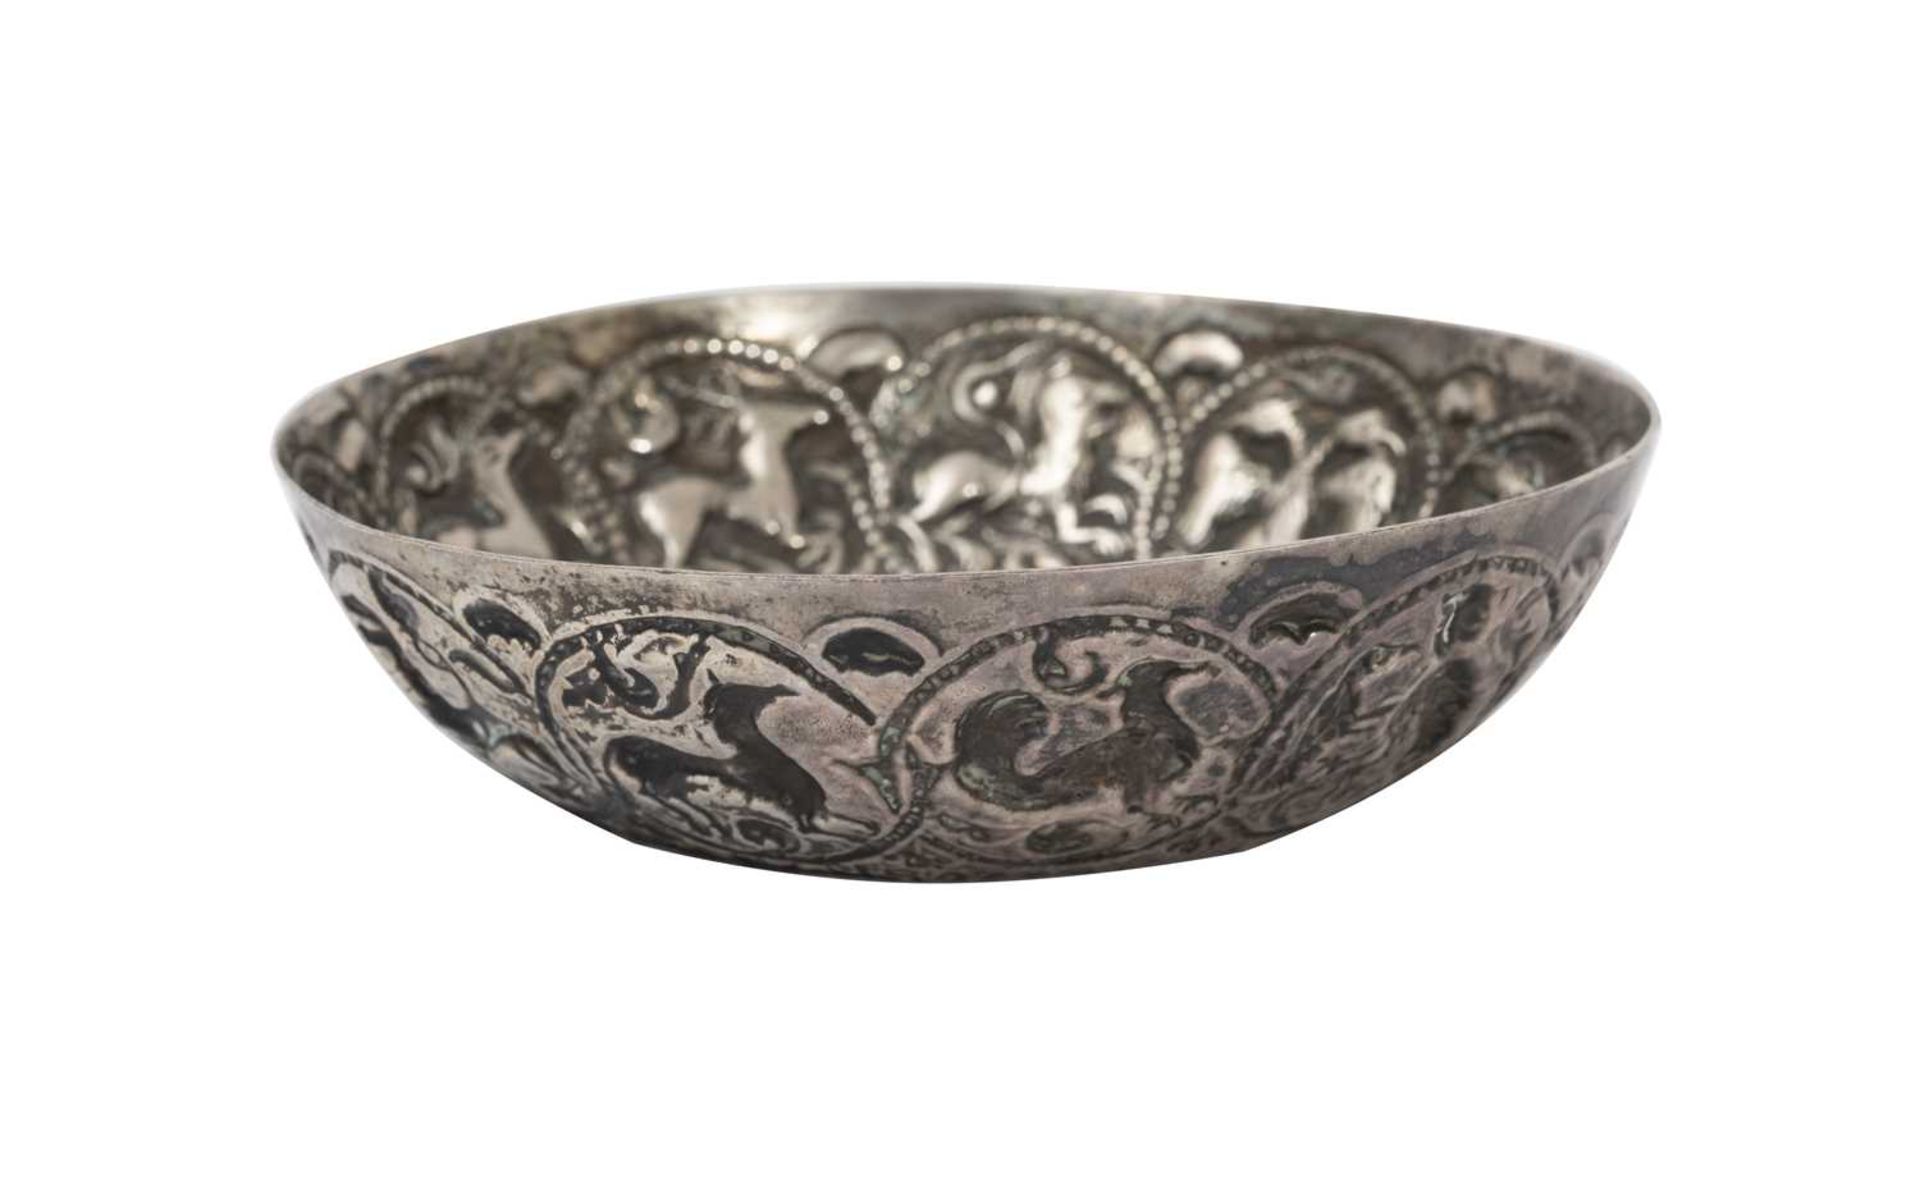 A SMALL OTTOMAN STYLE SILVER BOWL - Image 3 of 3